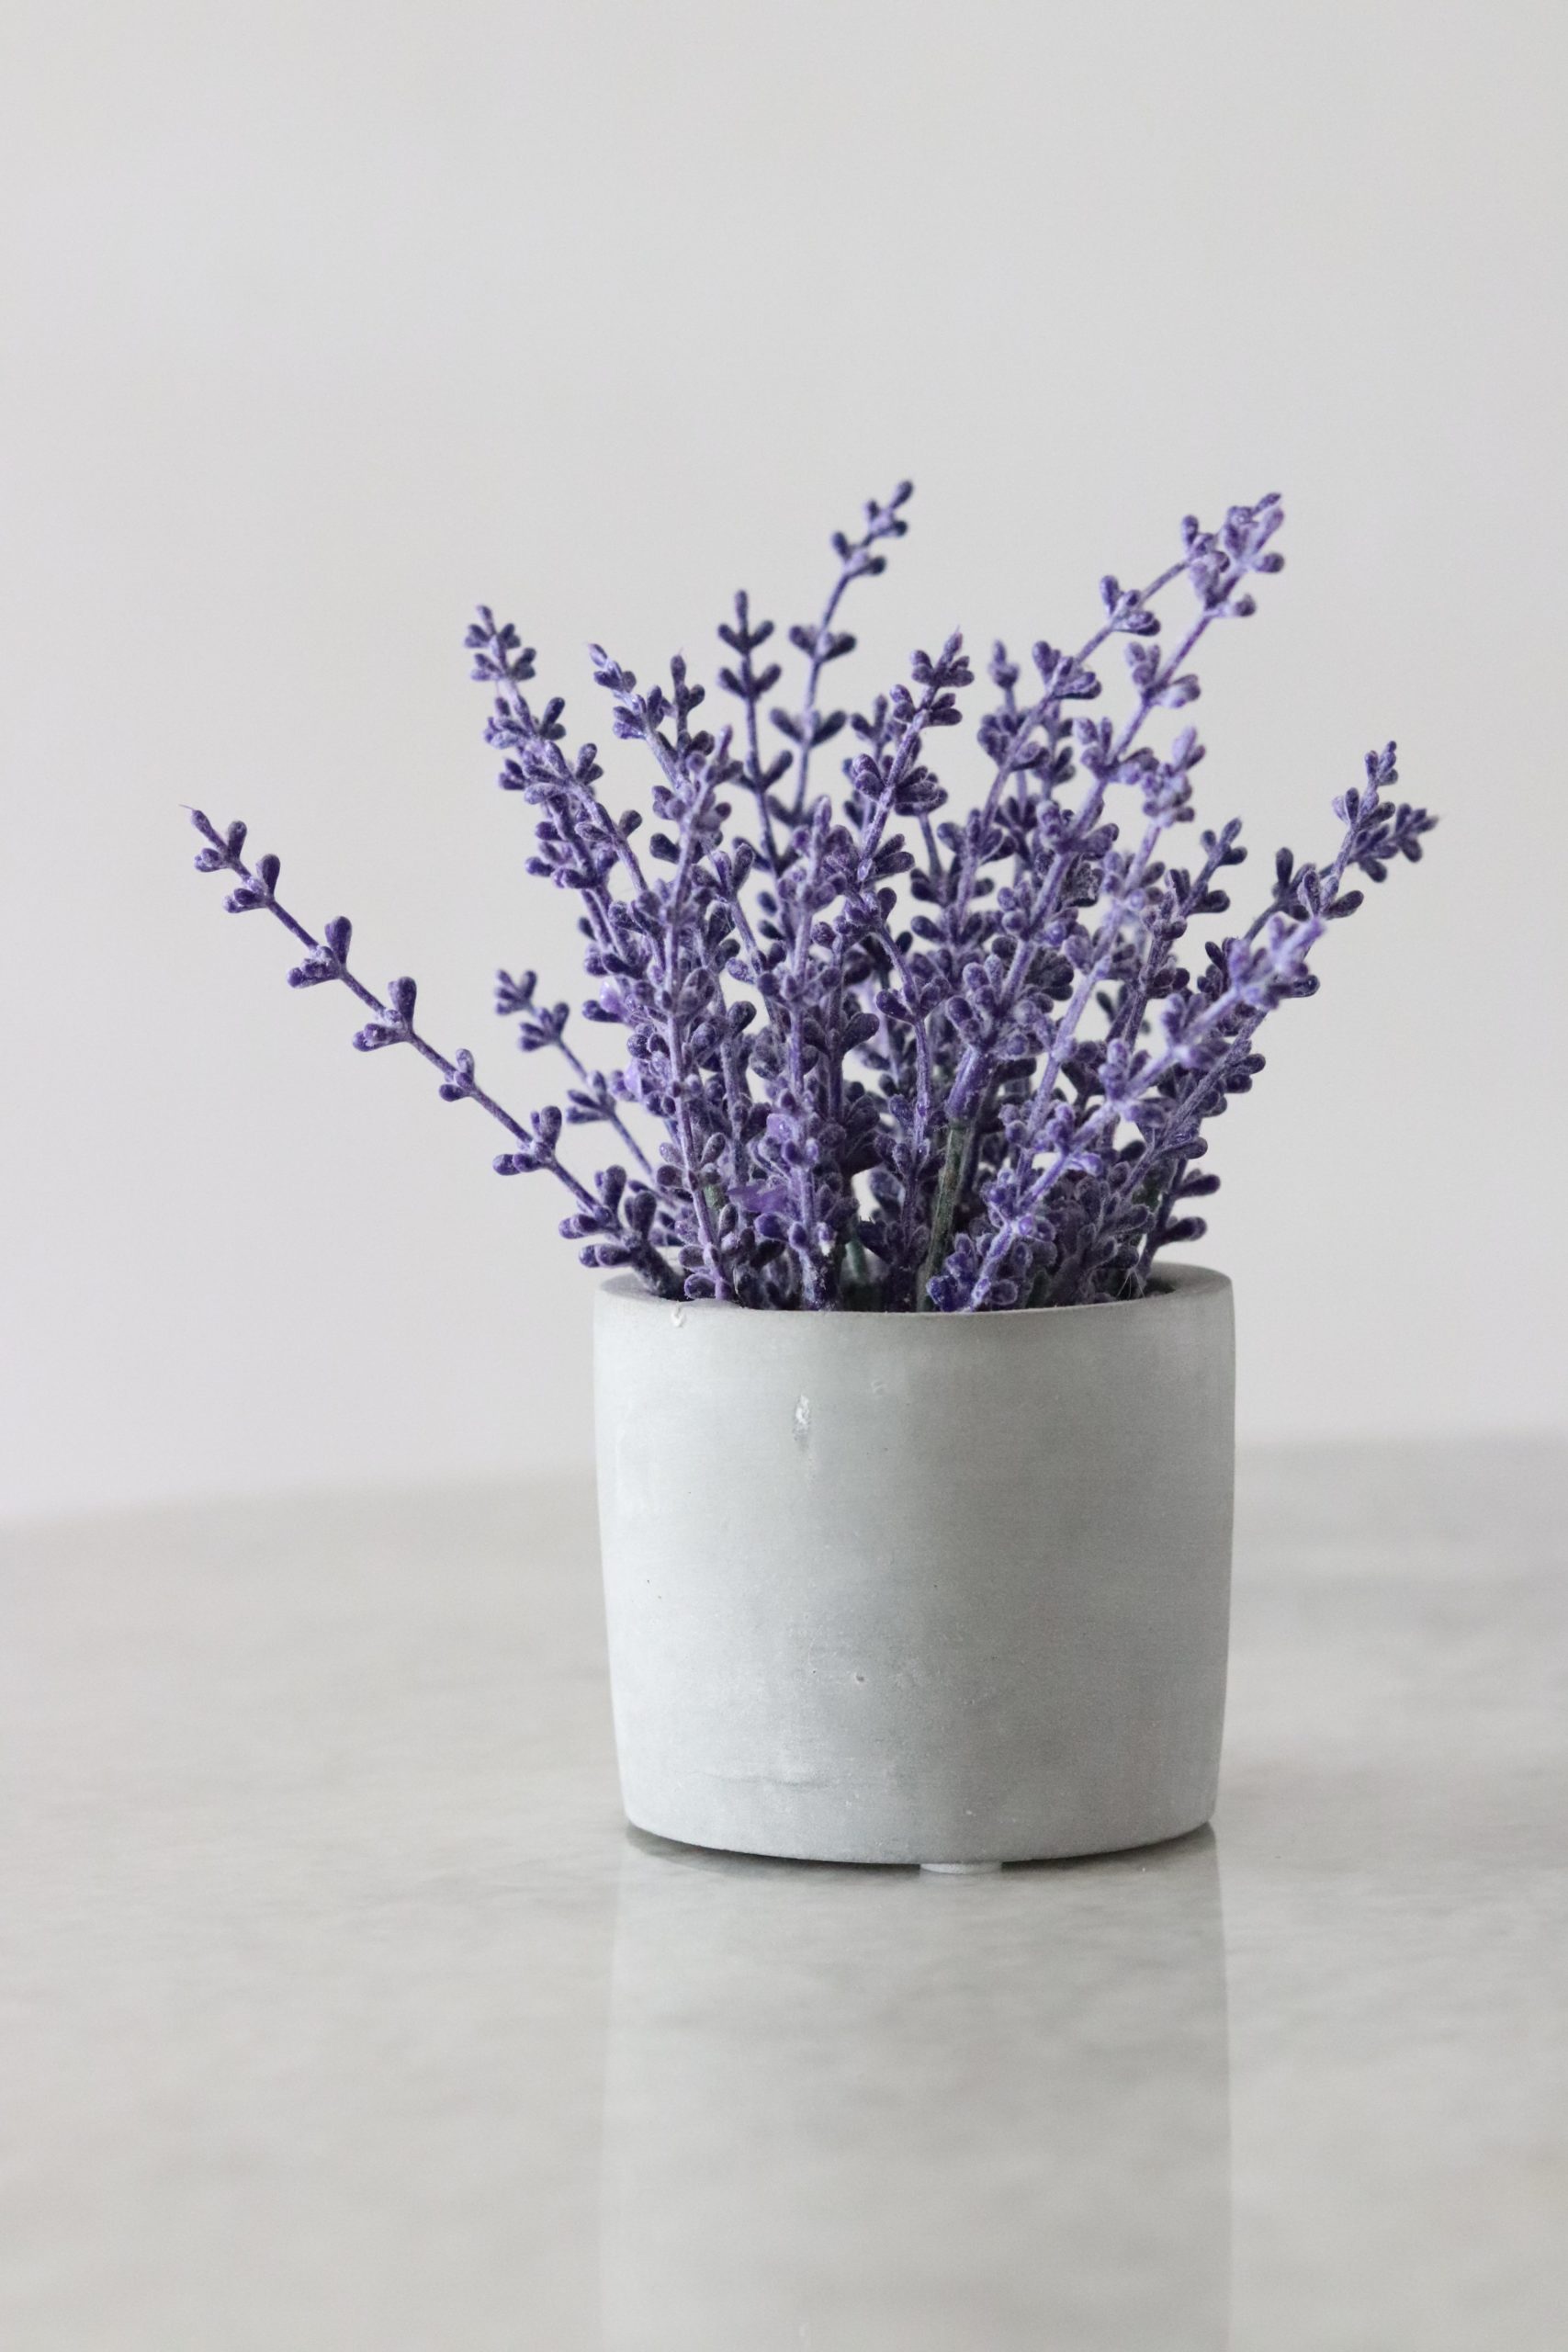 Lavender as indoor plant, brings colour and smell.one of the 10 best indoor plants for your home and to purify the air